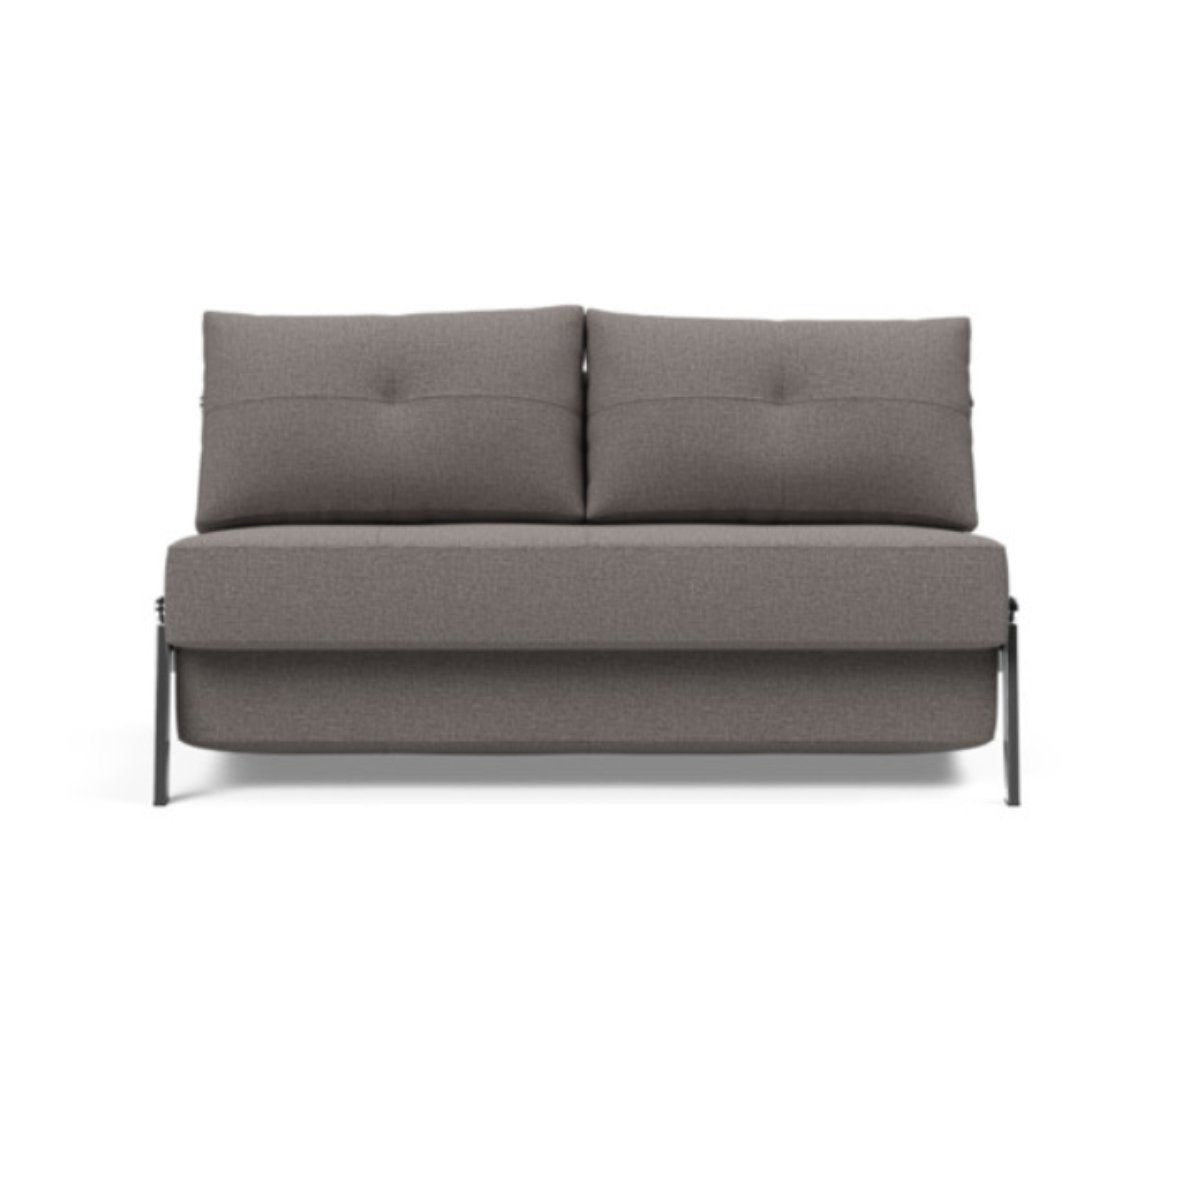 Load image into Gallery viewer, Cubed Full Size Sofa Bed With Chrome Legs 521 Mixed Dance GreySofa Beds INNOVATION  521 Mixed Dance Grey   Four Hands, Burke Decor, Mid Century Modern Furniture, Old Bones Furniture Company, Old Bones Co, Modern Mid Century, Designer Furniture, https://www.oldbonesco.com/
